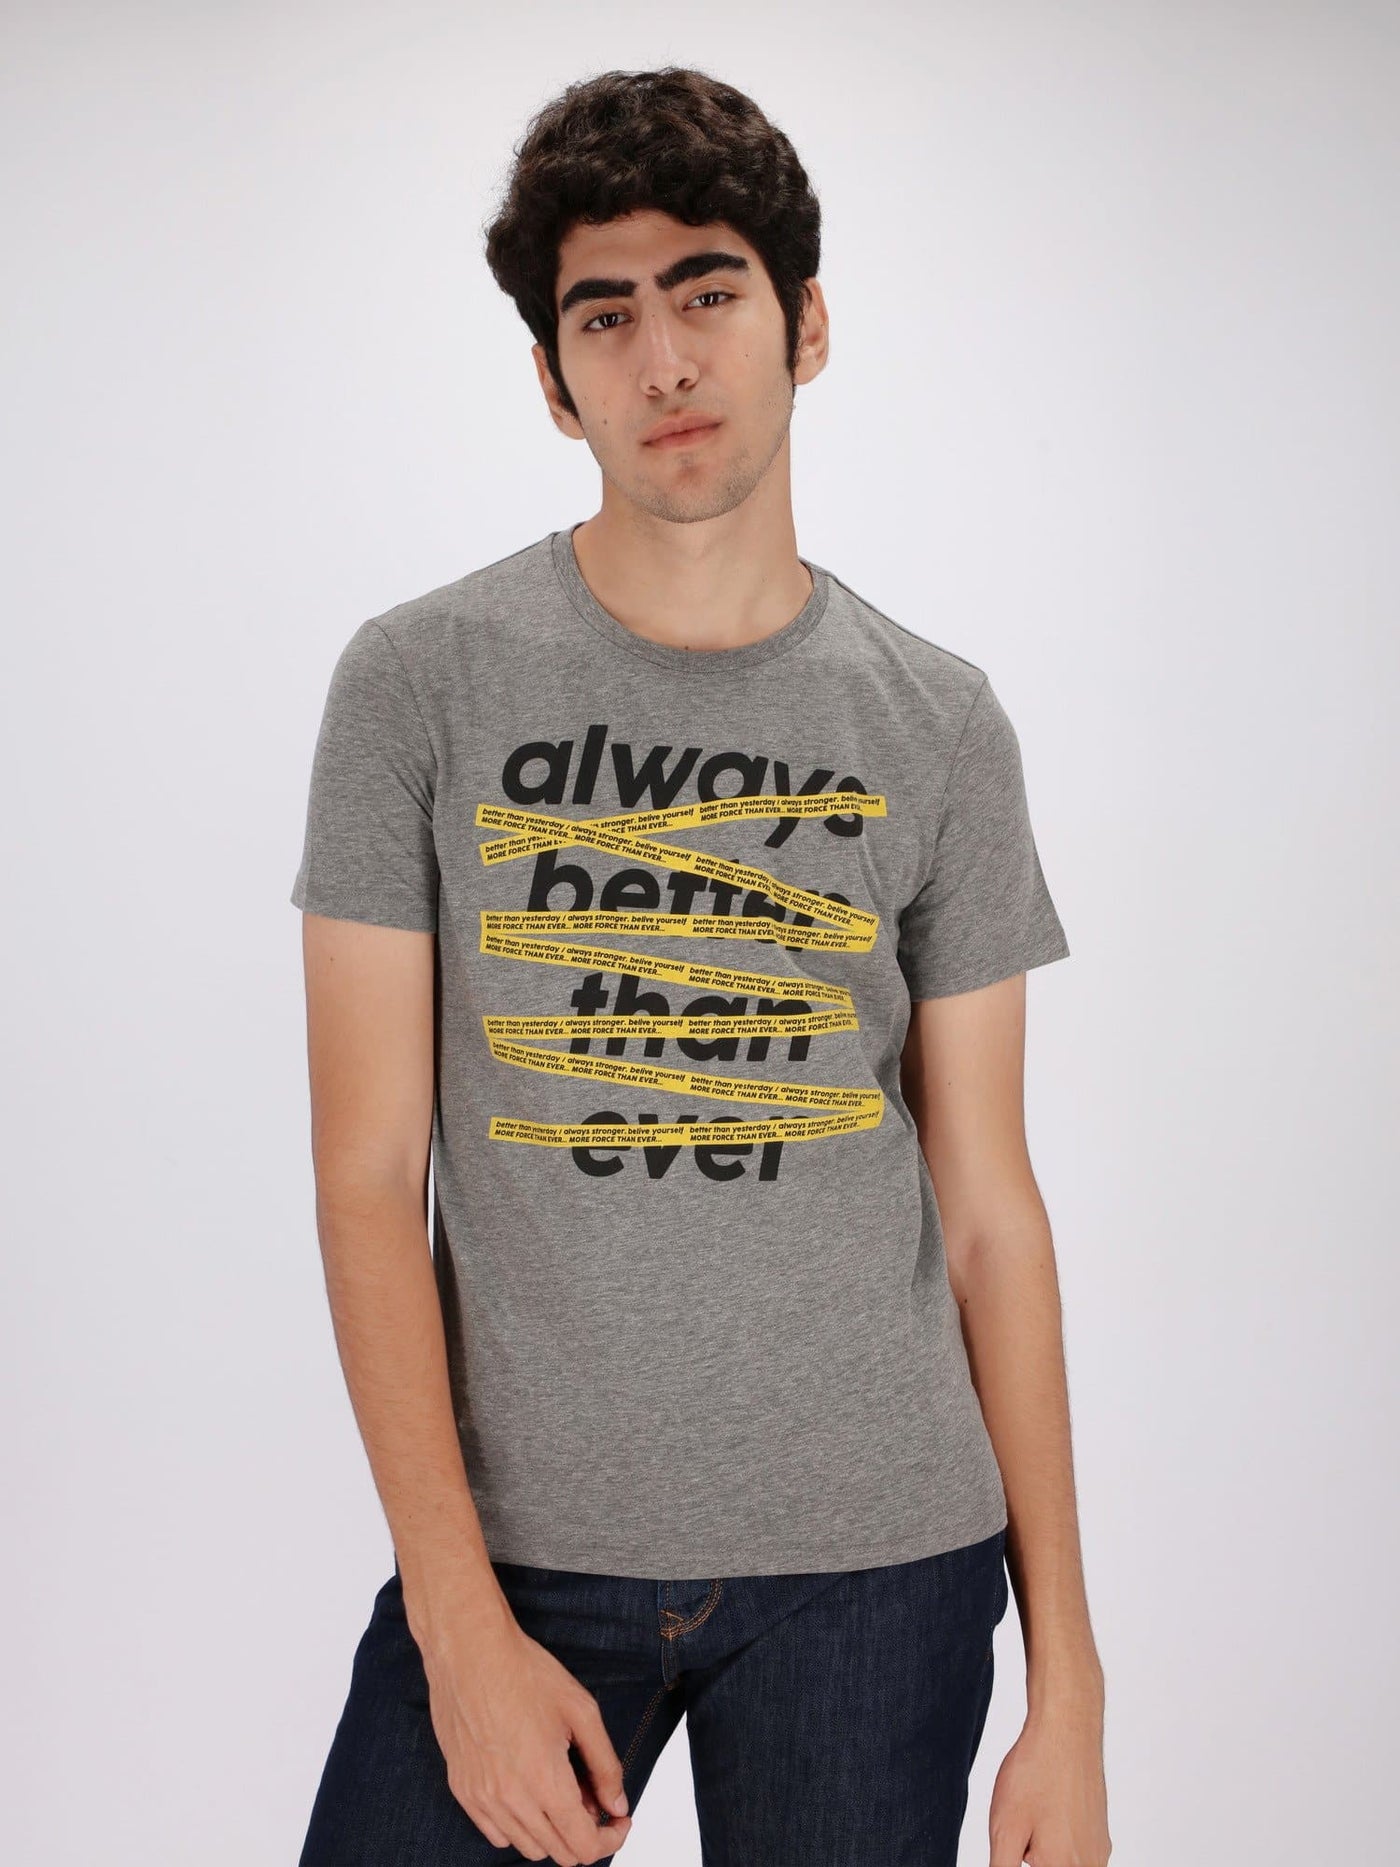 OR T-Shirts Heather Grey / S Always Better Front Print T-Shirt